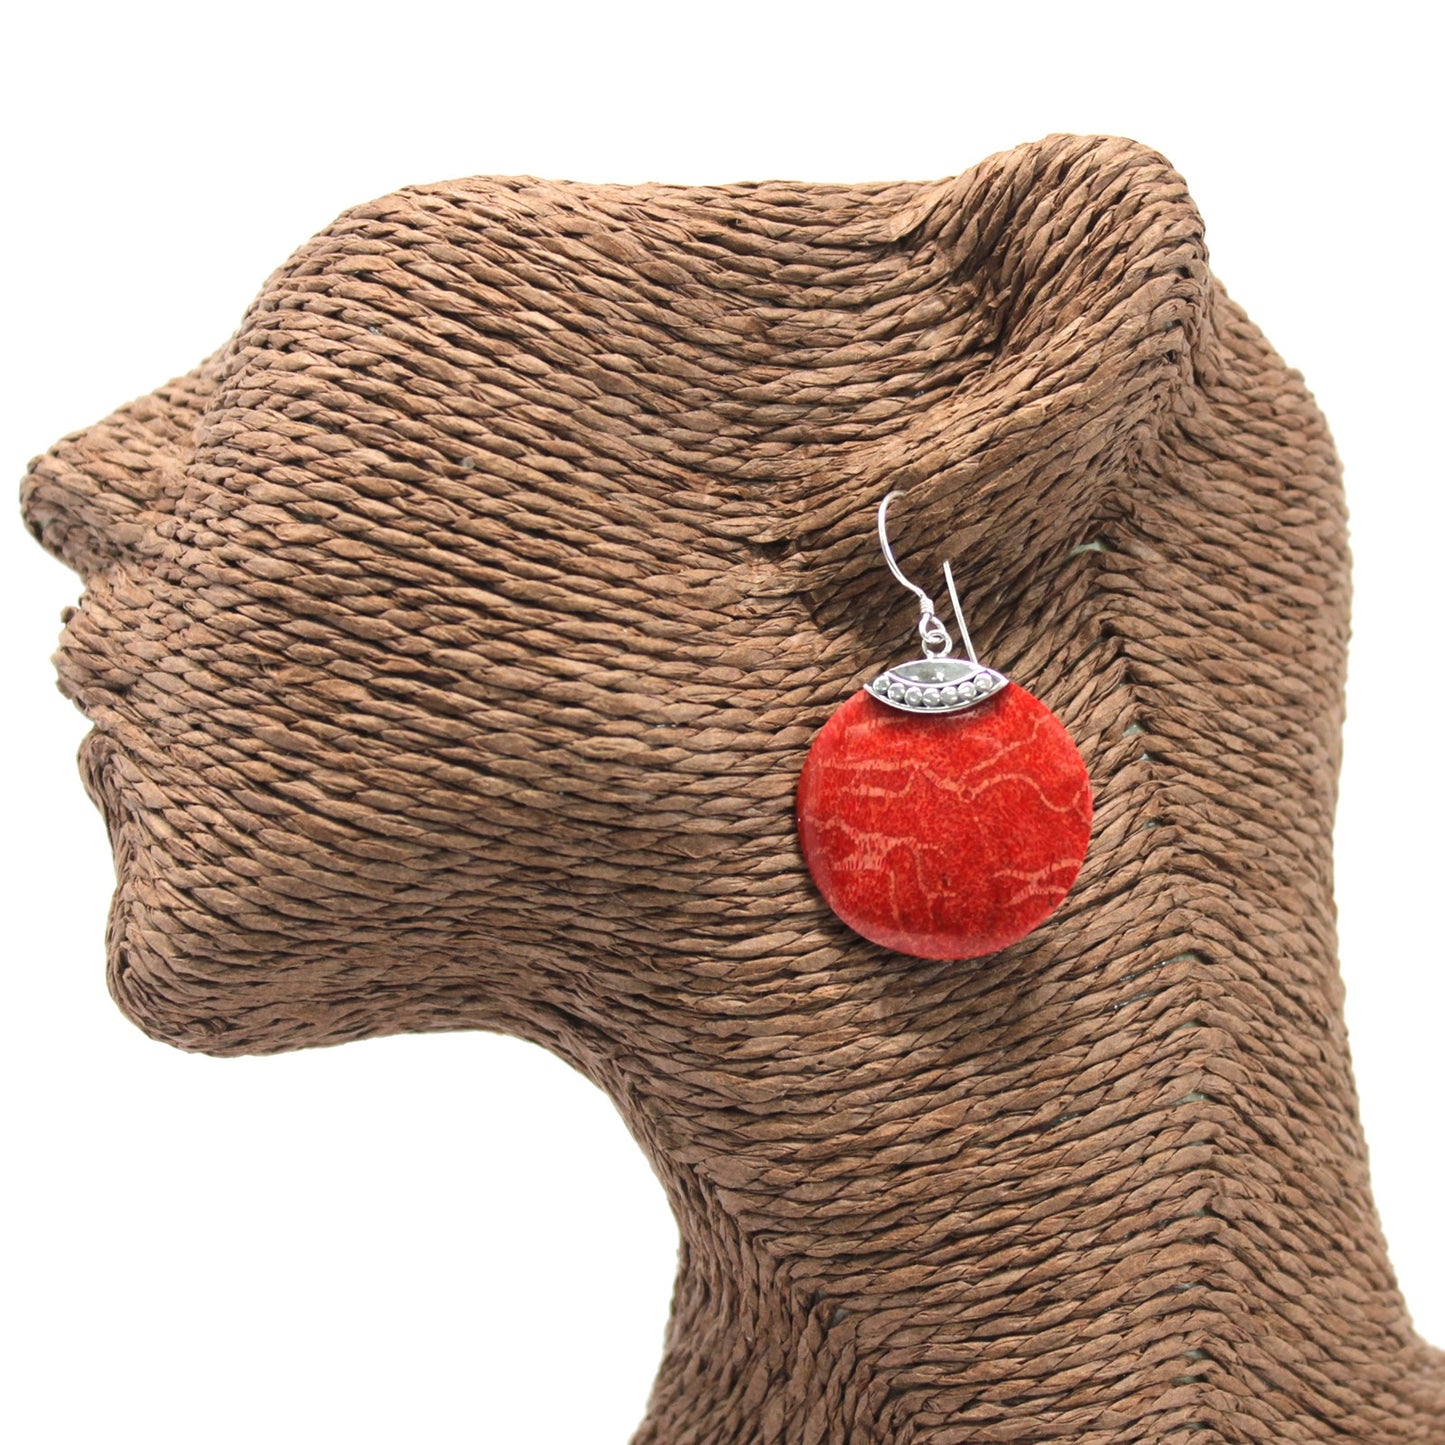 Classic Disc - Red Coral Imitation 925 Silver Earings